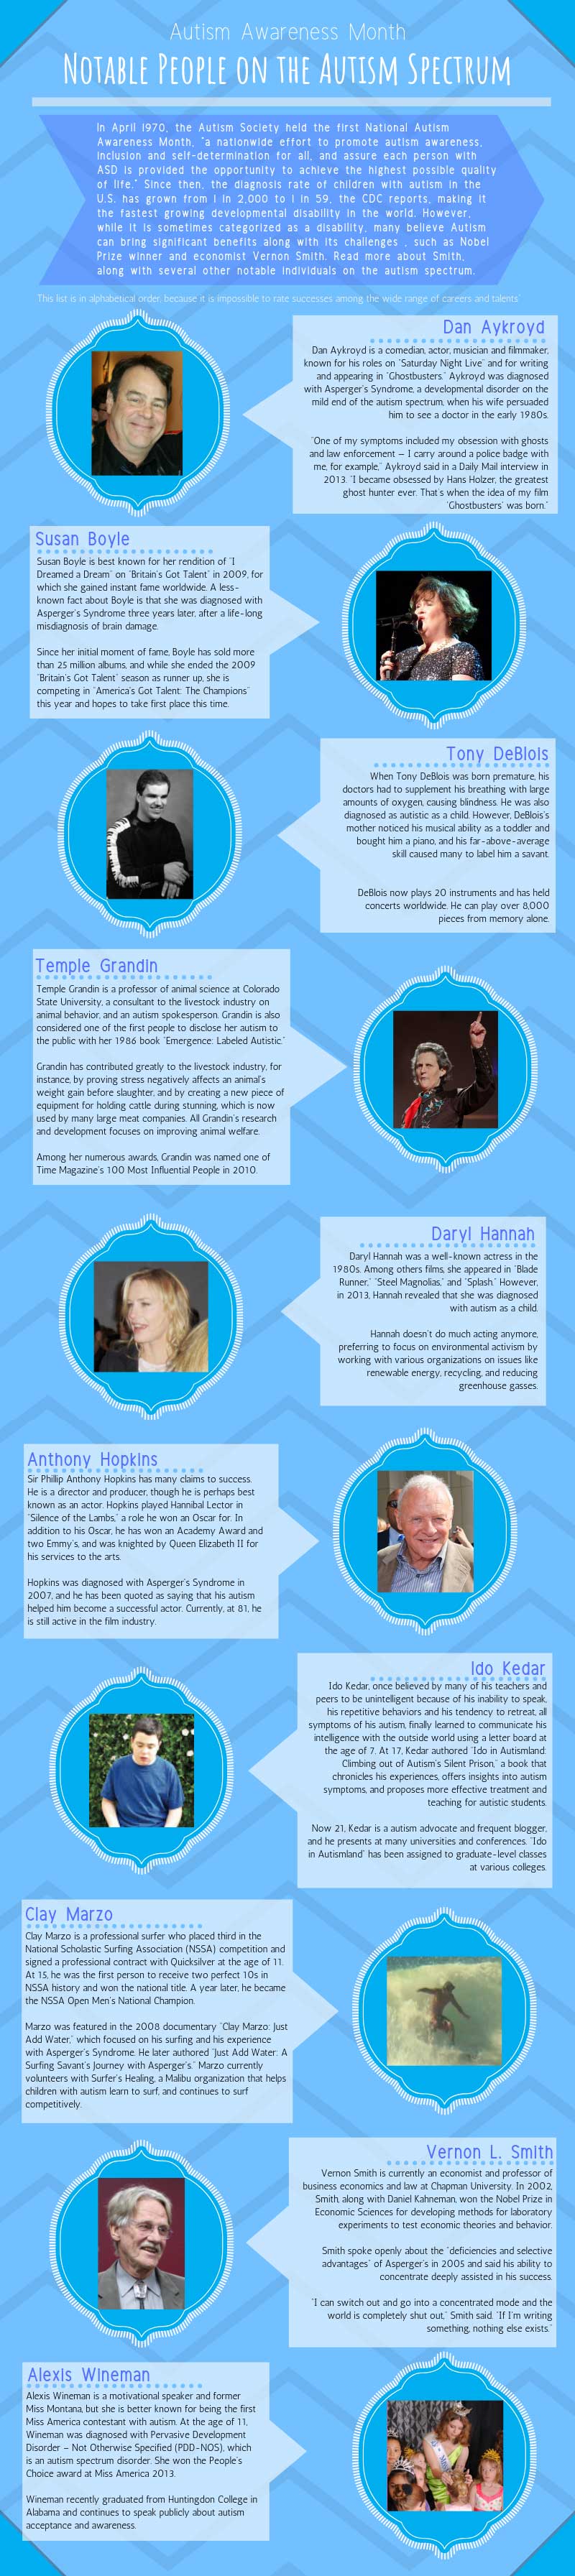 GRAPHIC: 10 notable individuals on the autism spectrum. Graphic by The Signal reporter Sydney Cooper.